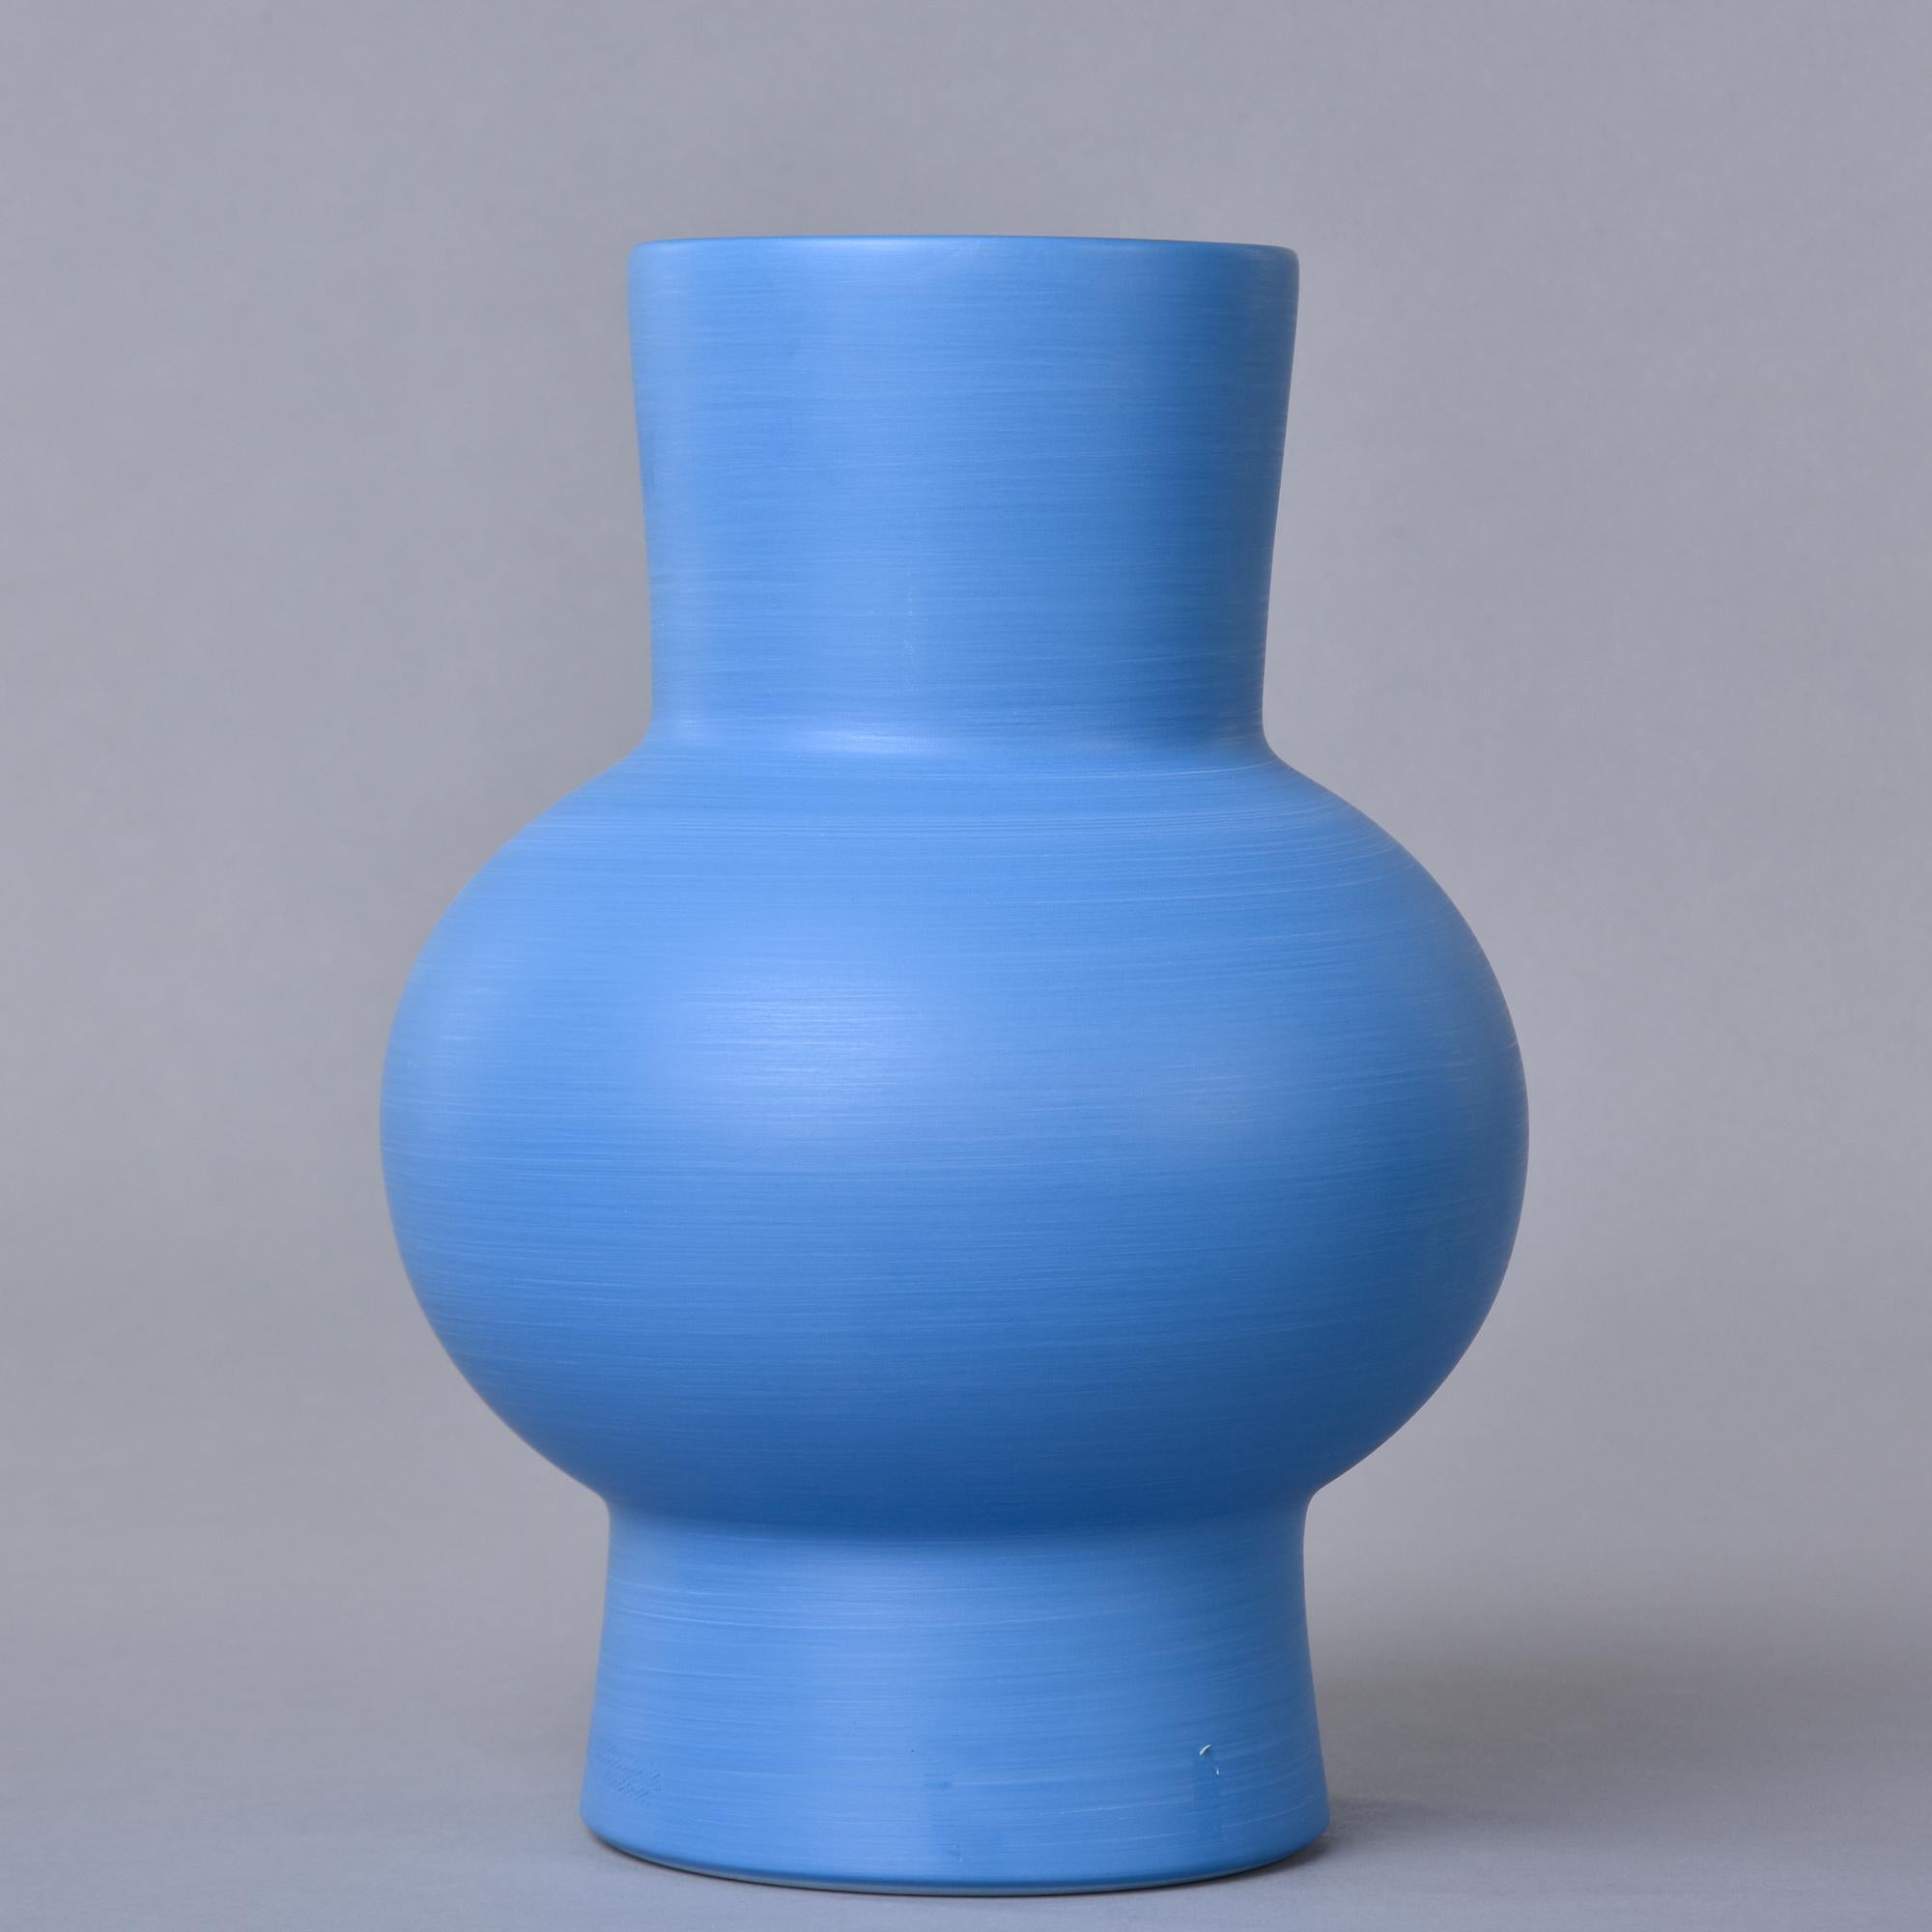 New and made in Italy by Rina Menardi, this thin-walled vase stands over 12” high and has a pleasing shape. The cornflower blue colored glaze has a contrasting dark washed interior. Signed on underside of base. New with no flaws found. Other colors,